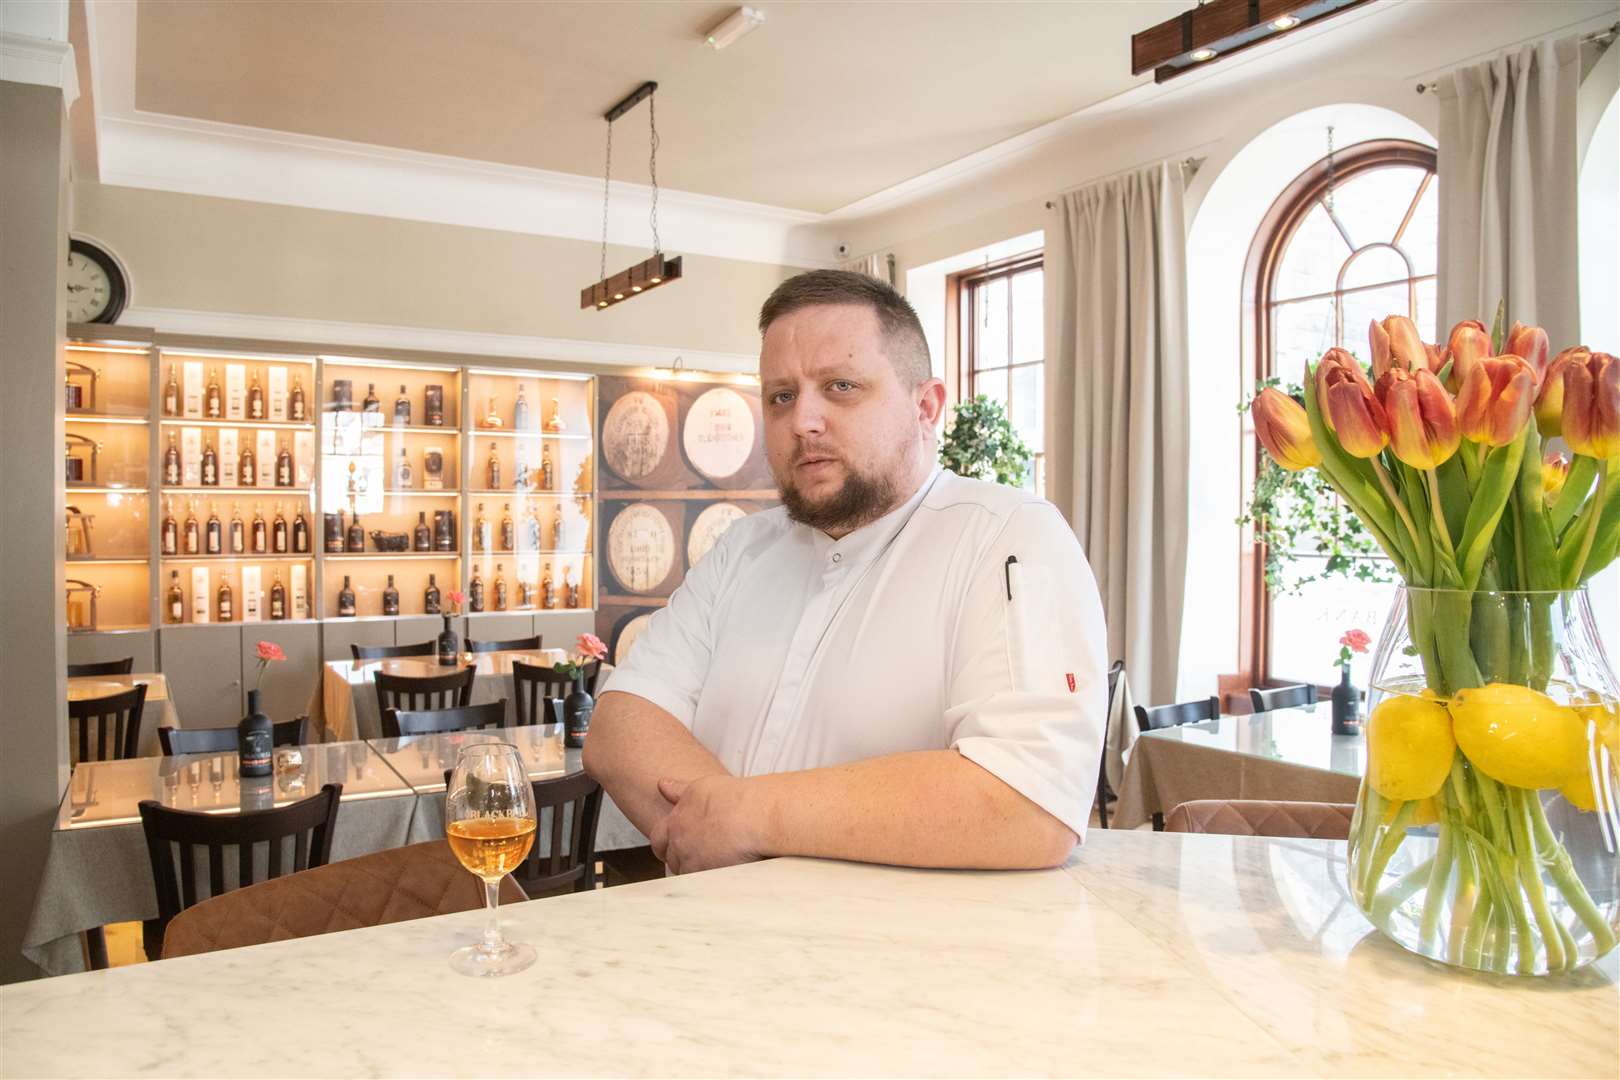 Ian Rainbird, chef manager toasts The Bank Restaurant in Huntly which opens tonight. Picture: Daniel Forsyth.